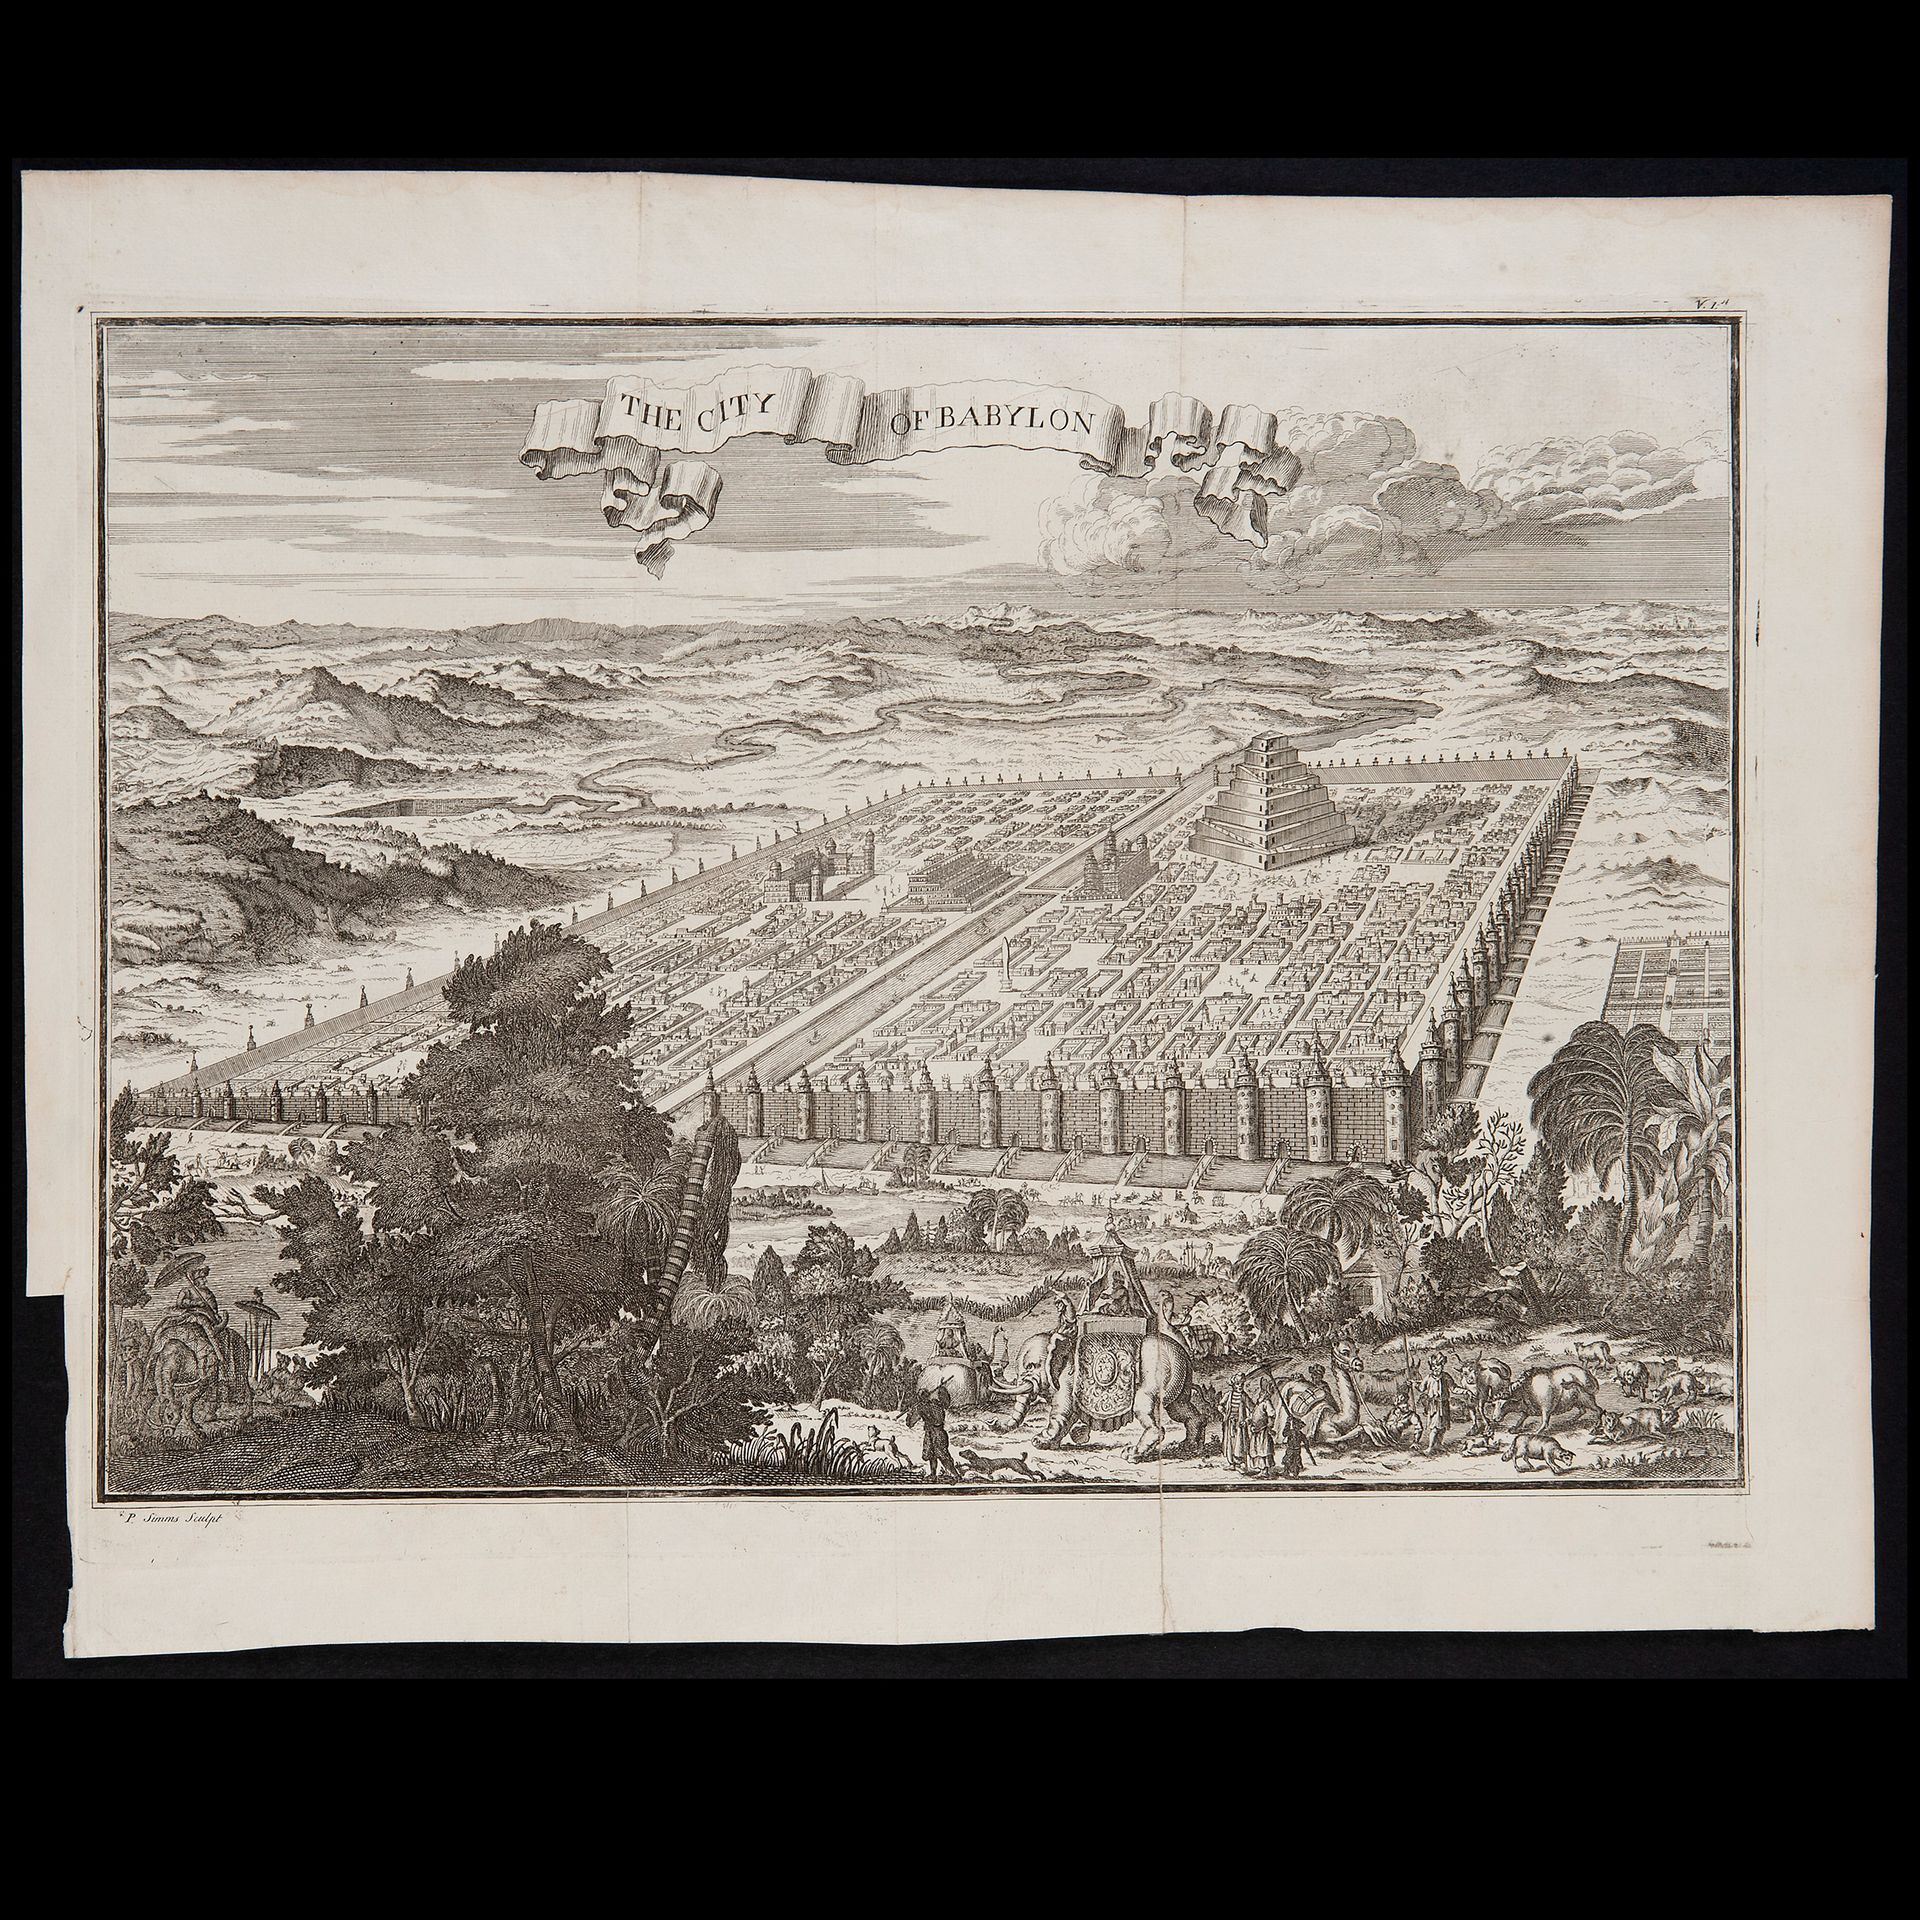 Philip Simms (active in Dublin between 1725 and 1749), 'The city of Babylon', Ir&hellip;